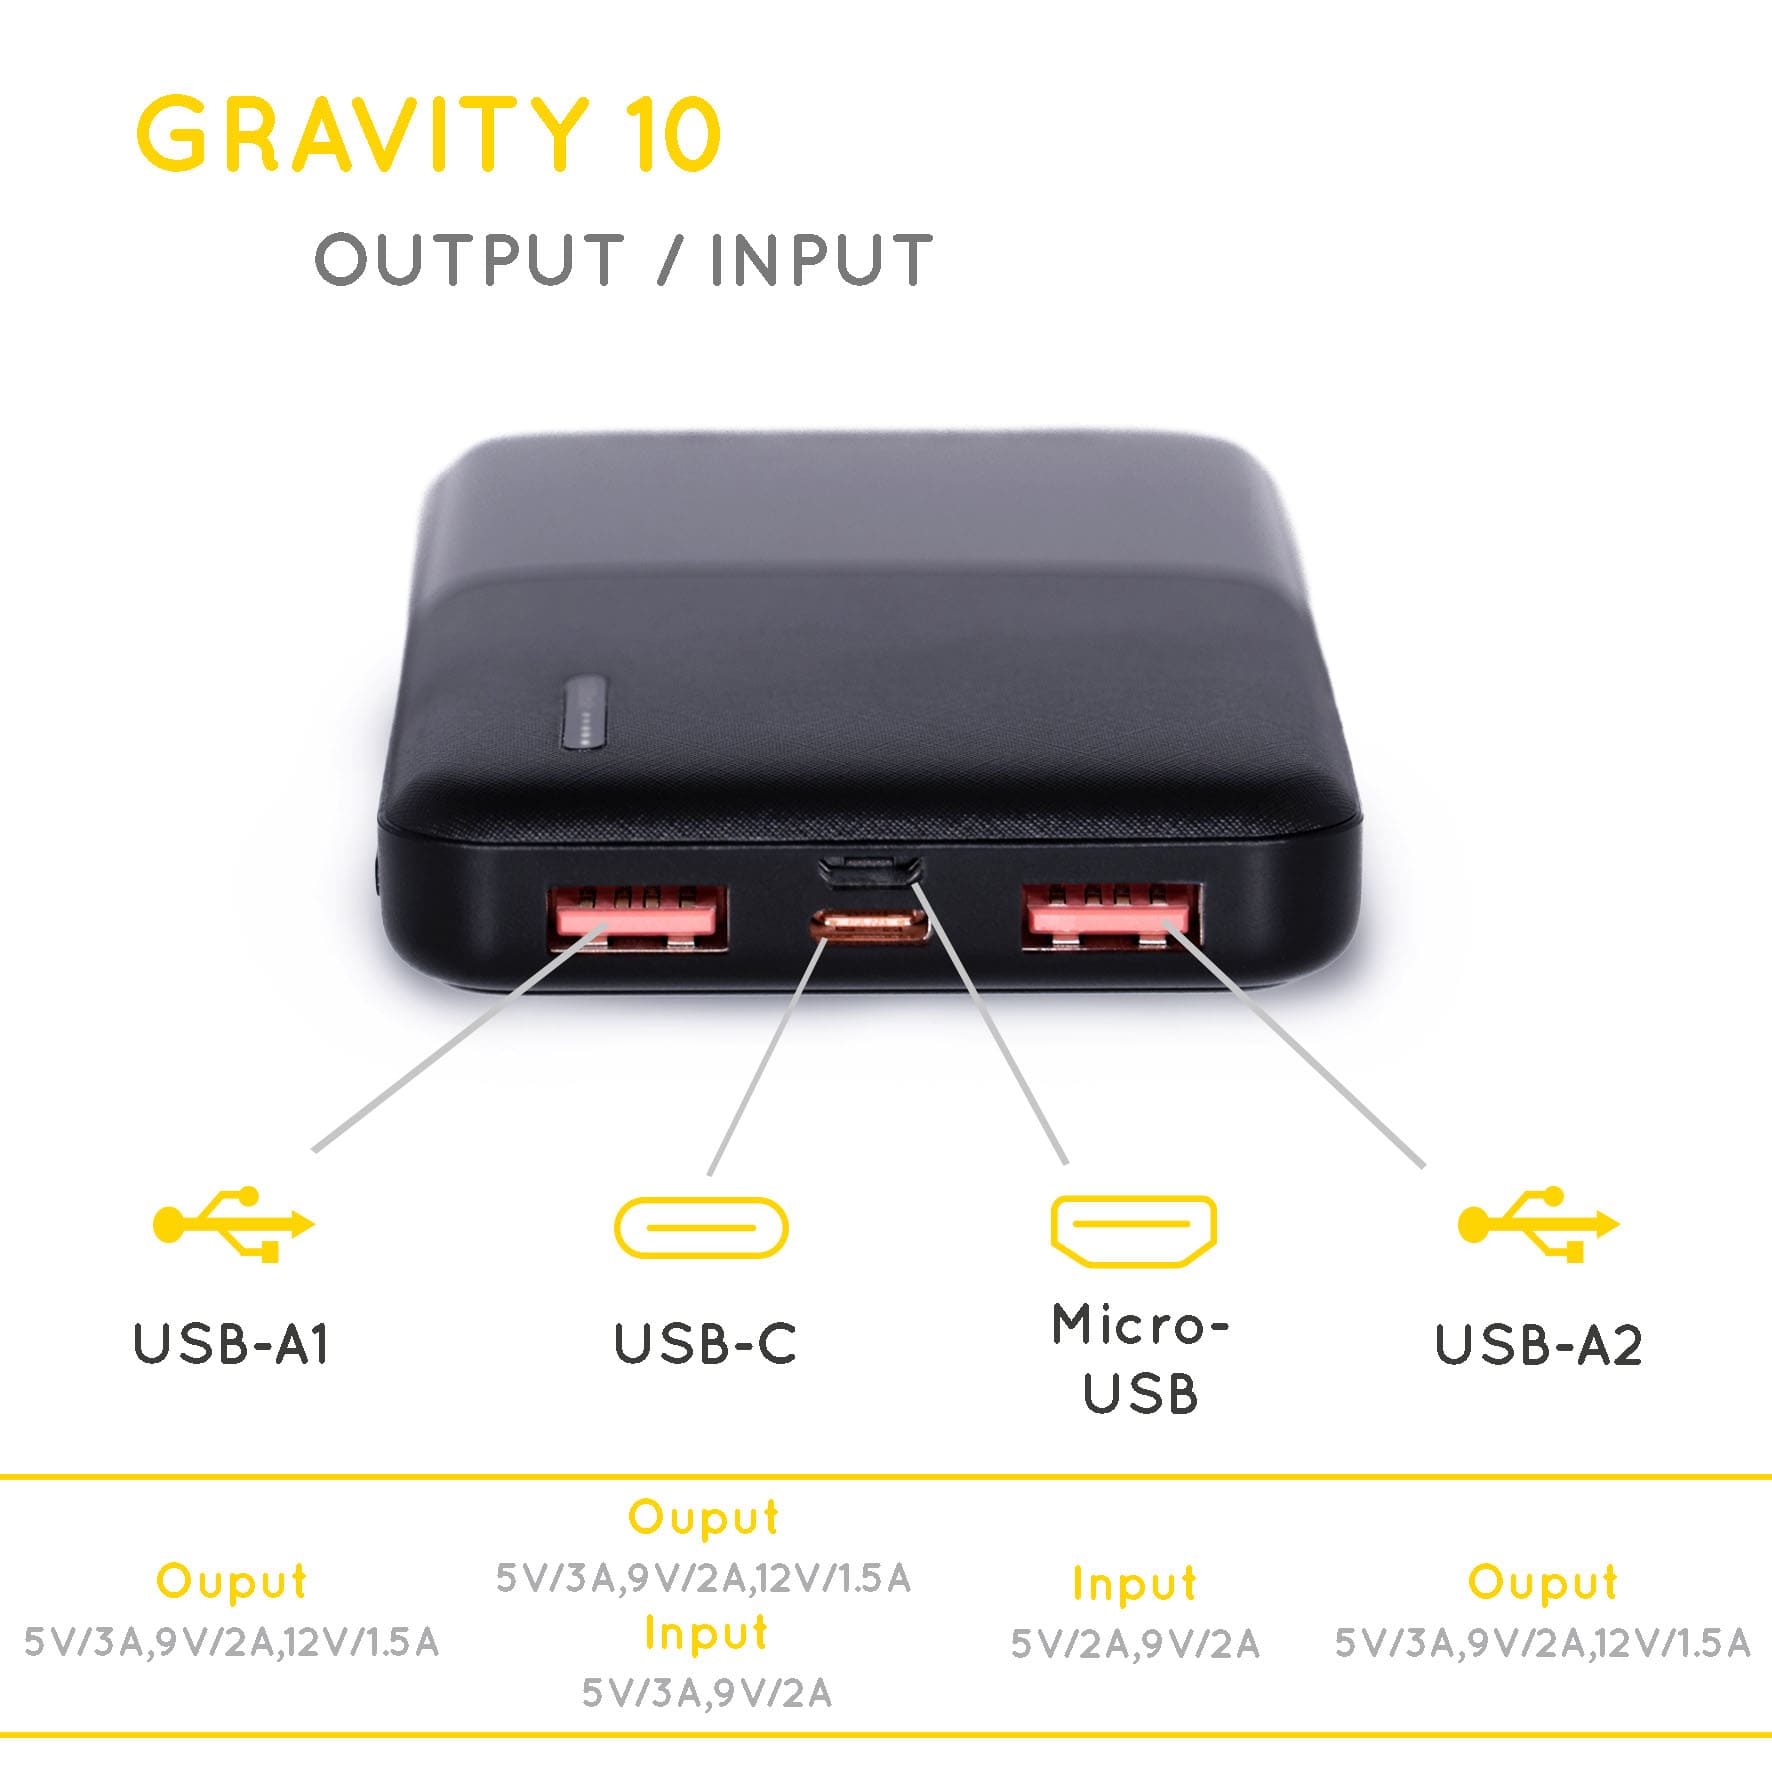 Gravity 10'000 mAh - Fast Portable Power Bank - with specifications